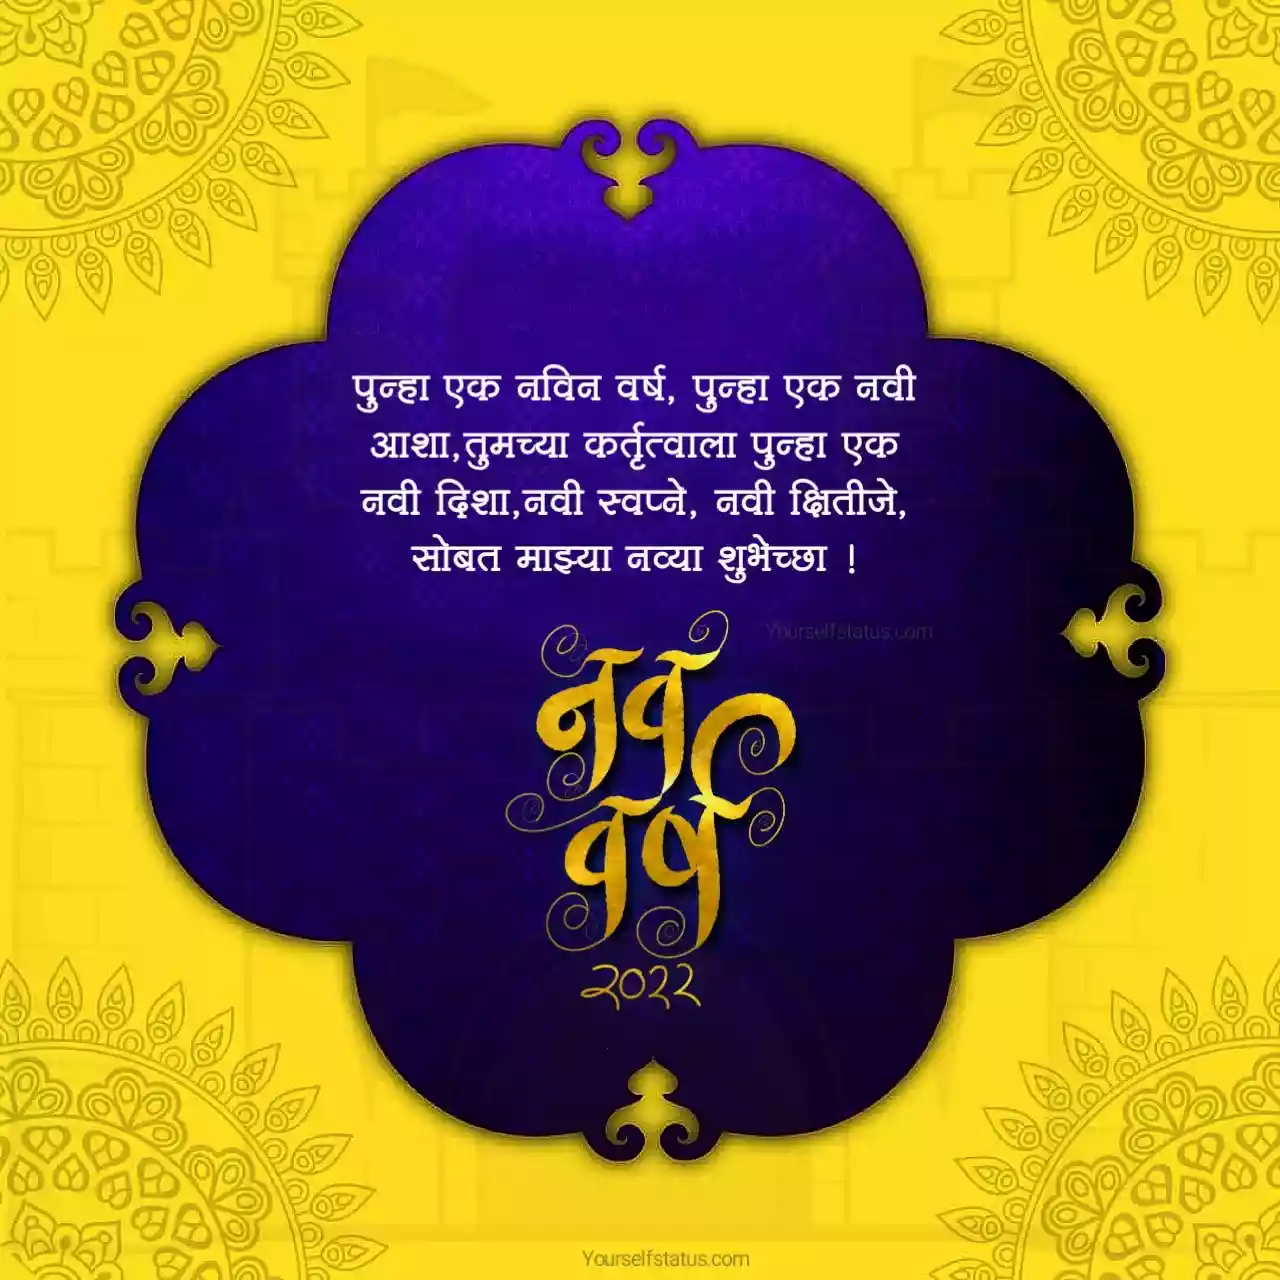 Happy new year images in marathi